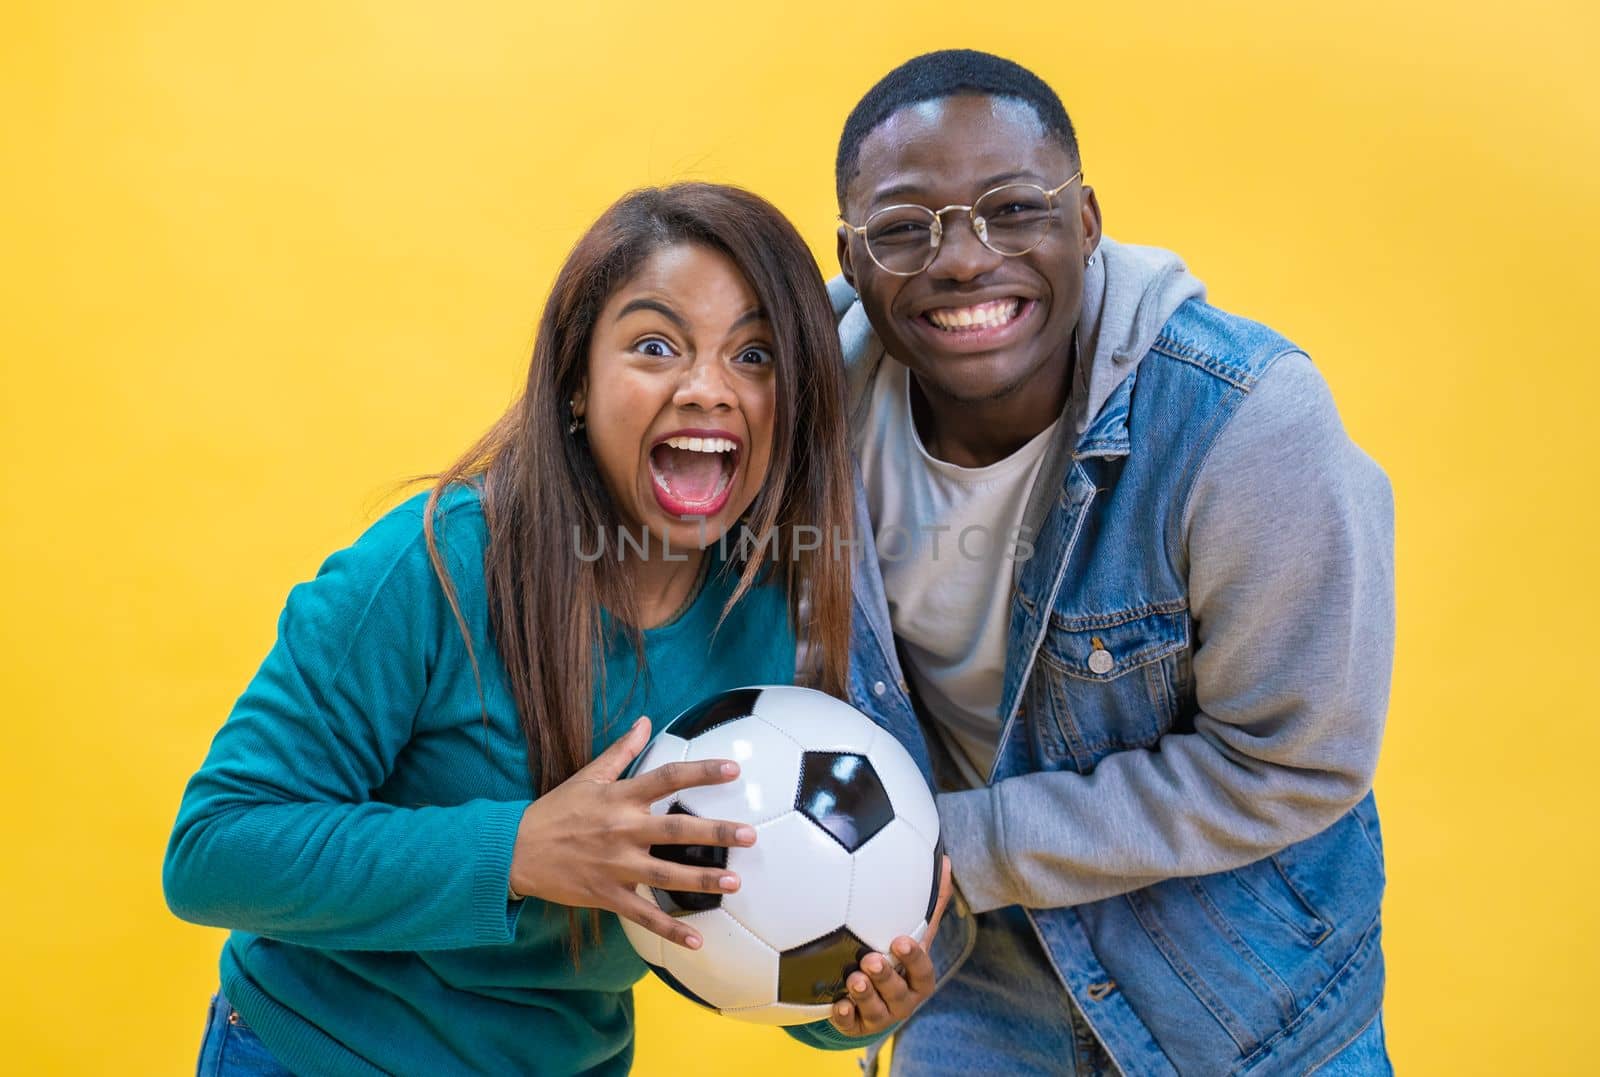 Excited ethnic diversity couple enjoying soccer together isolated on a yellow background looking at camera with a ball in their hands. Happy football fans concept. High quality photo